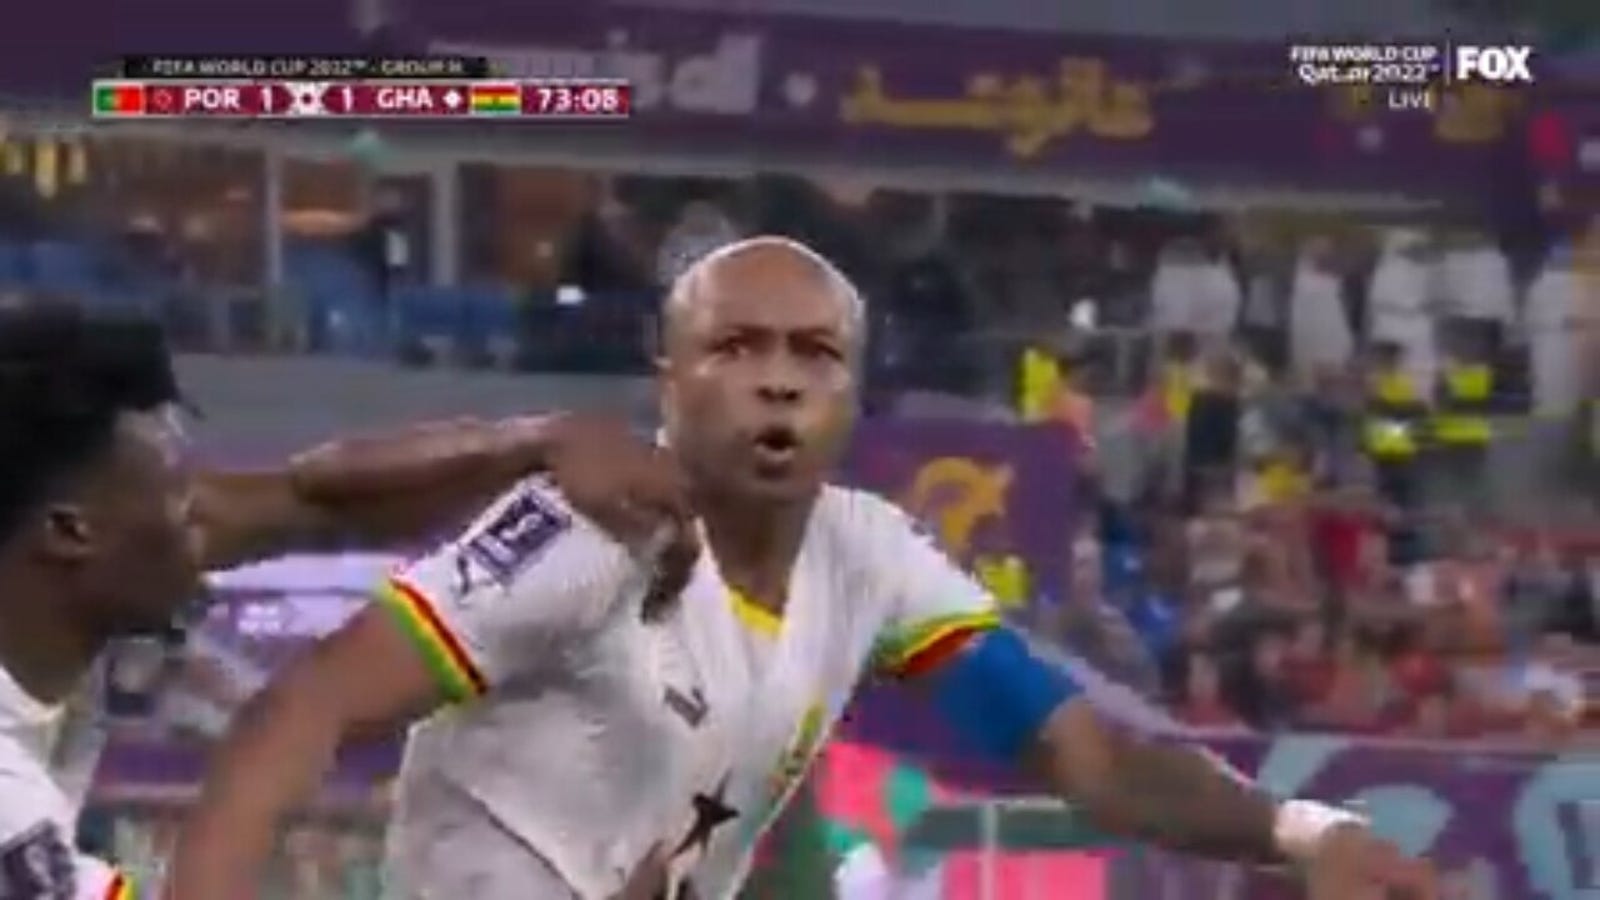 Ghana's Andre Ayew scored in the 73rd minute against Portugal